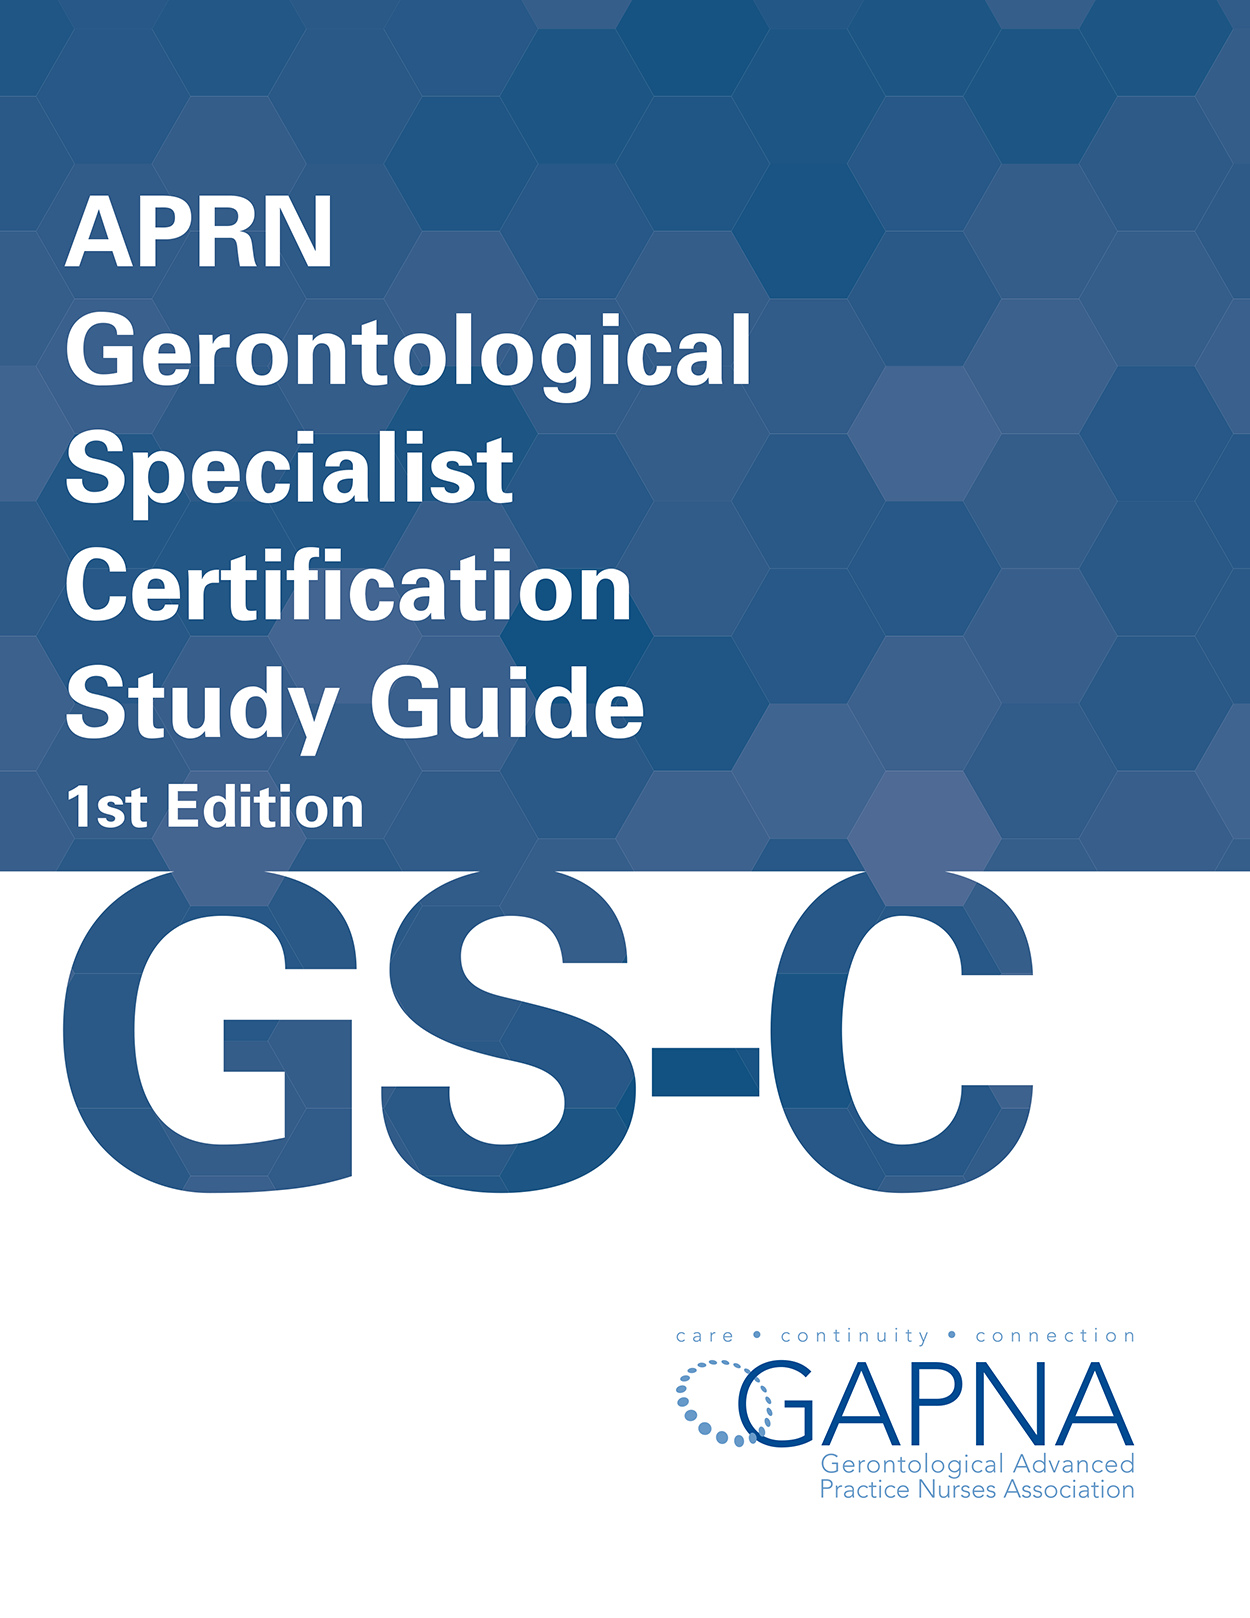 APRN Gerontological Specialist Certification Study Guide 1st Edition